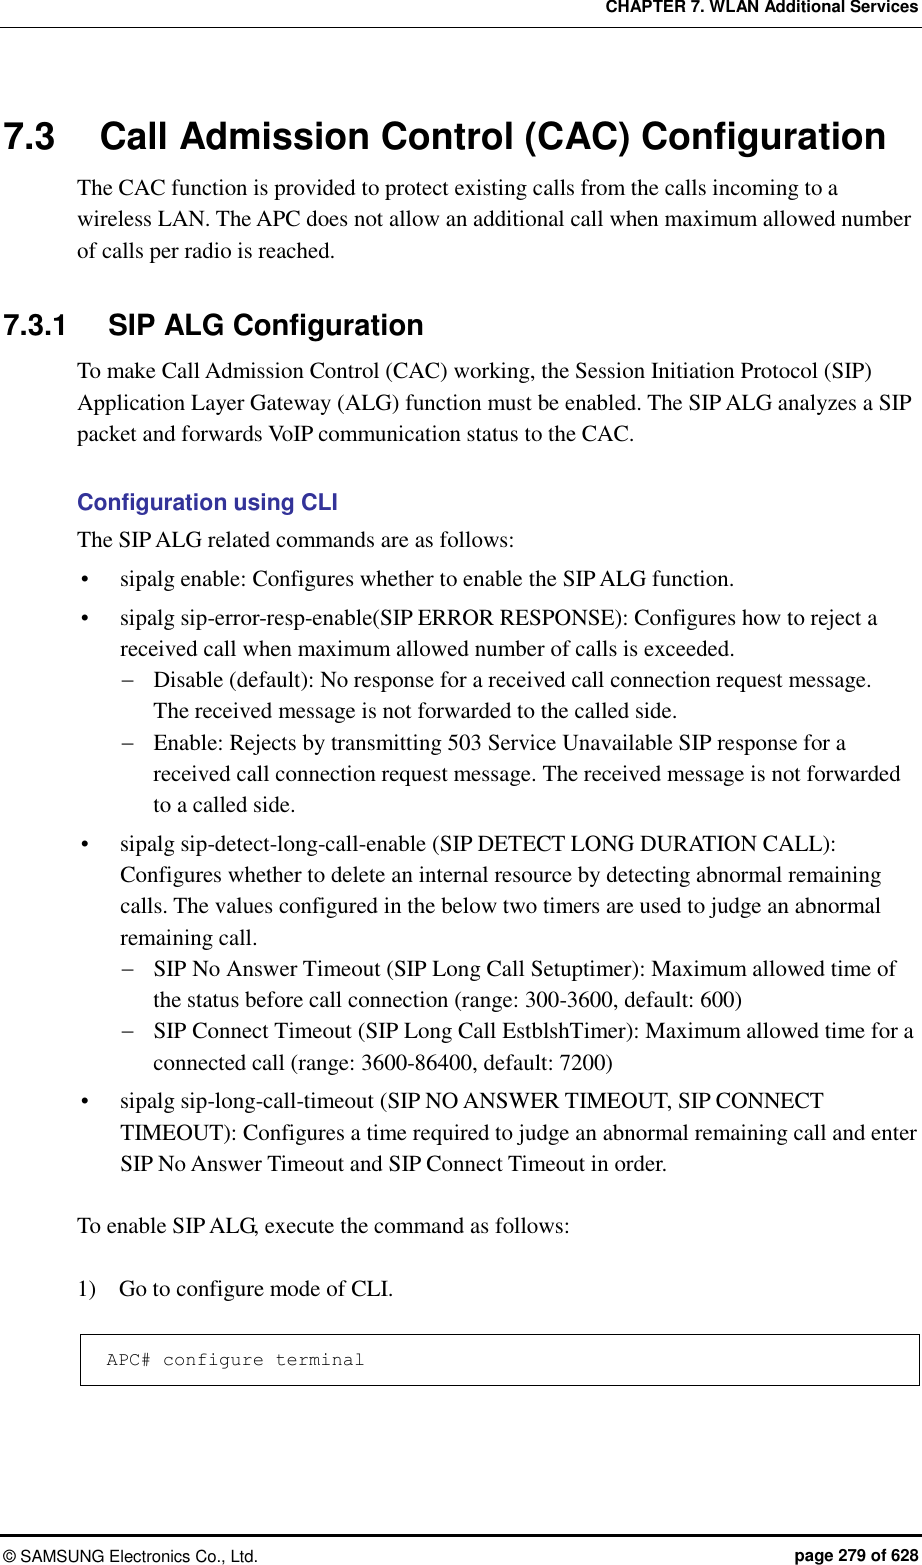 CHAPTER 7. WLAN Additional Services ©  SAMSUNG Electronics Co., Ltd.  page 279 of 628 7.3  Call Admission Control (CAC) Configuration The CAC function is provided to protect existing calls from the calls incoming to a wireless LAN. The APC does not allow an additional call when maximum allowed number of calls per radio is reached.  7.3.1  SIP ALG Configuration To make Call Admission Control (CAC) working, the Session Initiation Protocol (SIP) Application Layer Gateway (ALG) function must be enabled. The SIP ALG analyzes a SIP packet and forwards VoIP communication status to the CAC.  Configuration using CLI The SIP ALG related commands are as follows:  sipalg enable: Configures whether to enable the SIP ALG function.  sipalg sip-error-resp-enable(SIP ERROR RESPONSE): Configures how to reject a received call when maximum allowed number of calls is exceeded.  Disable (default): No response for a received call connection request message.   The received message is not forwarded to the called side.  Enable: Rejects by transmitting 503 Service Unavailable SIP response for a received call connection request message. The received message is not forwarded to a called side.  sipalg sip-detect-long-call-enable (SIP DETECT LONG DURATION CALL): Configures whether to delete an internal resource by detecting abnormal remaining calls. The values configured in the below two timers are used to judge an abnormal remaining call.  SIP No Answer Timeout (SIP Long Call Setuptimer): Maximum allowed time of the status before call connection (range: 300-3600, default: 600)  SIP Connect Timeout (SIP Long Call EstblshTimer): Maximum allowed time for a connected call (range: 3600-86400, default: 7200)  sipalg sip-long-call-timeout (SIP NO ANSWER TIMEOUT, SIP CONNECT TIMEOUT): Configures a time required to judge an abnormal remaining call and enter SIP No Answer Timeout and SIP Connect Timeout in order.  To enable SIP ALG, execute the command as follows:  1)    Go to configure mode of CLI.  APC# configure terminal  